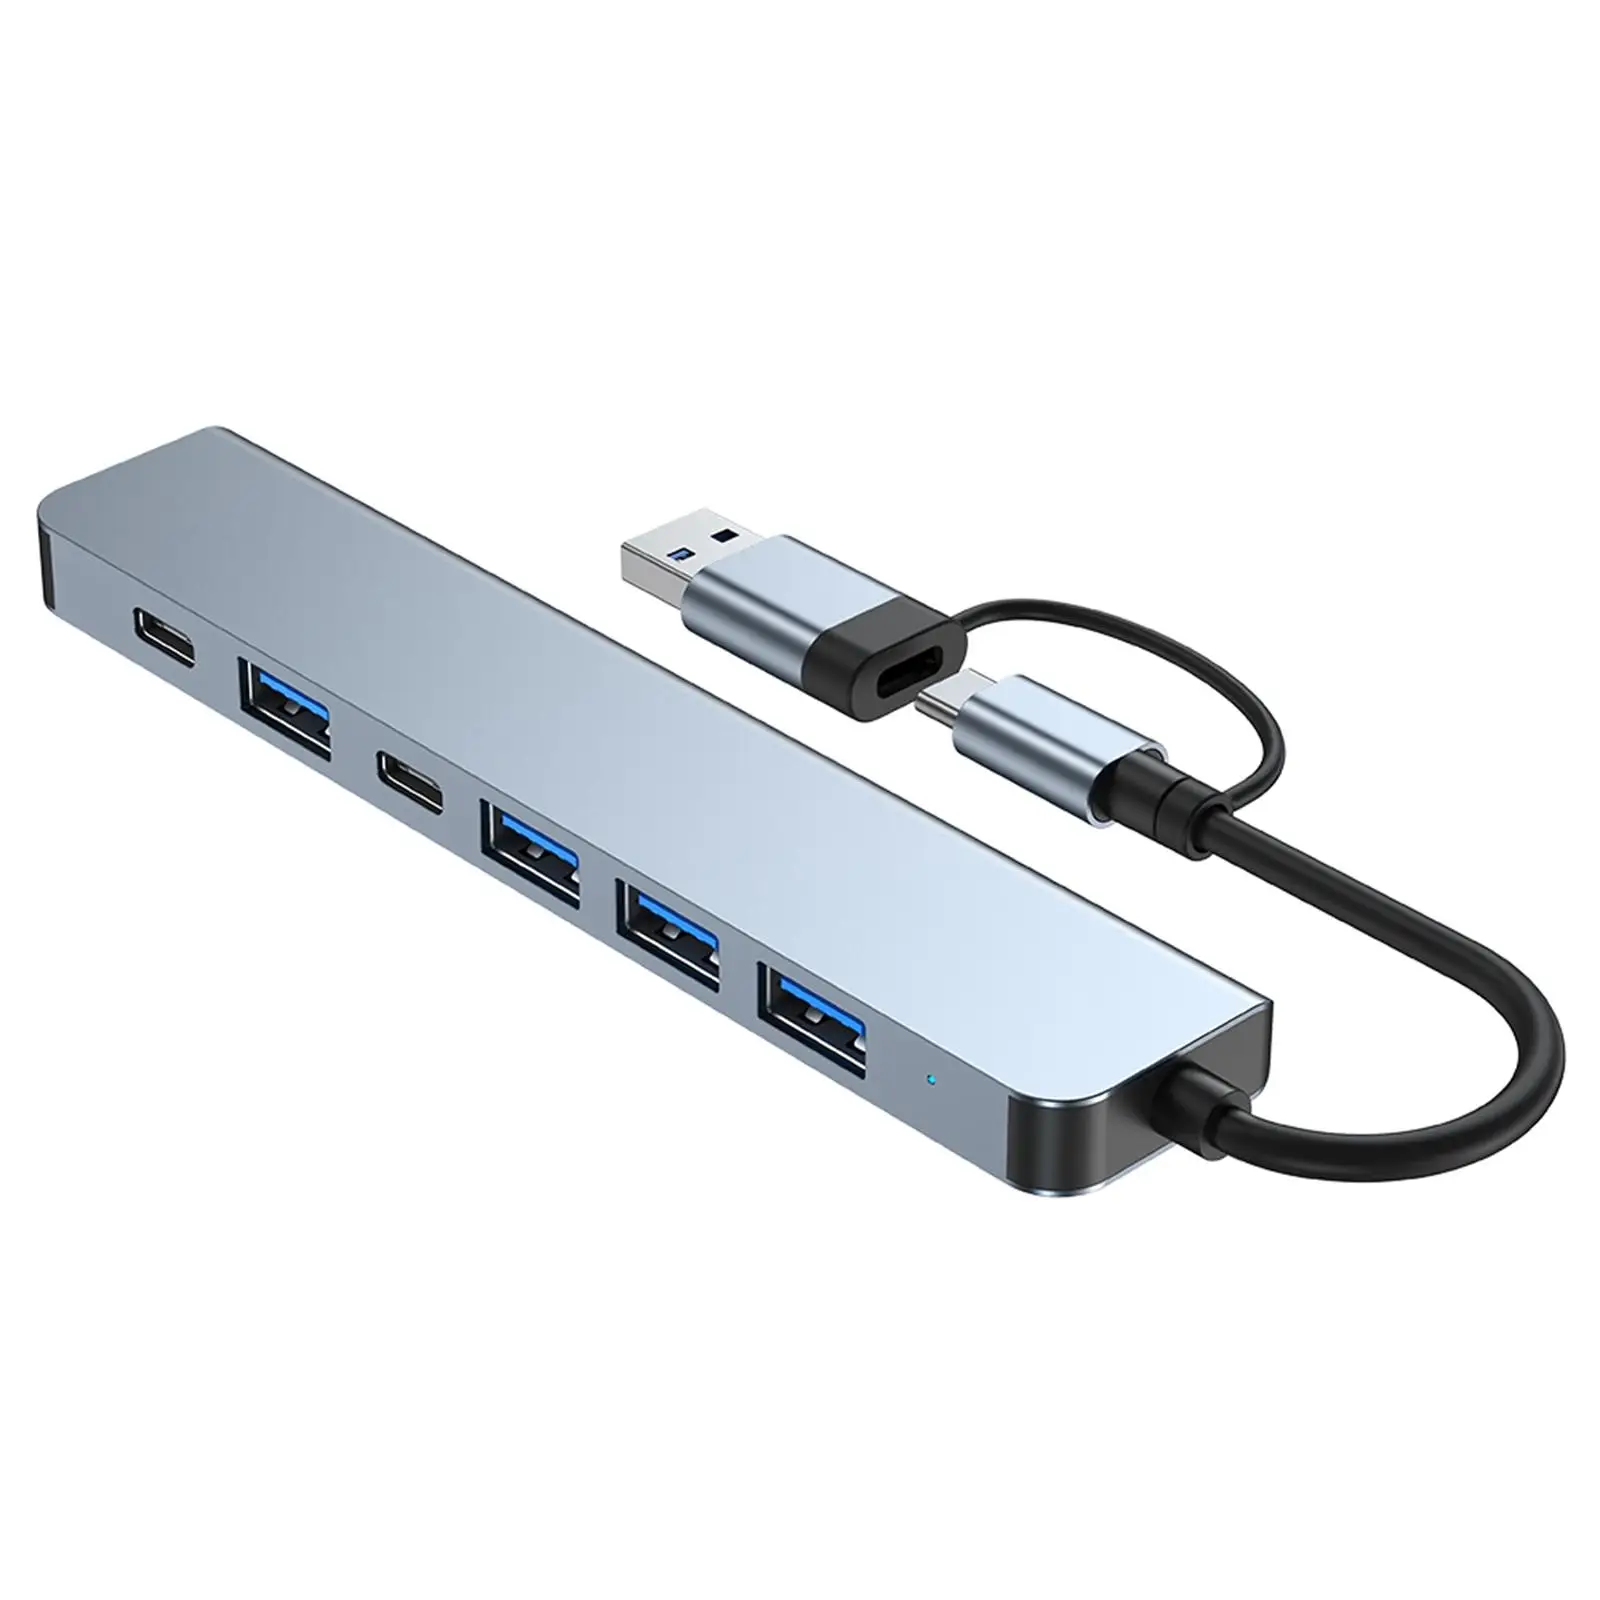 7 Ports USB Type C Hub with A 5W Charging Port Plug and Play Multiport Adapter Converter for Phones Type C Devices Laptop